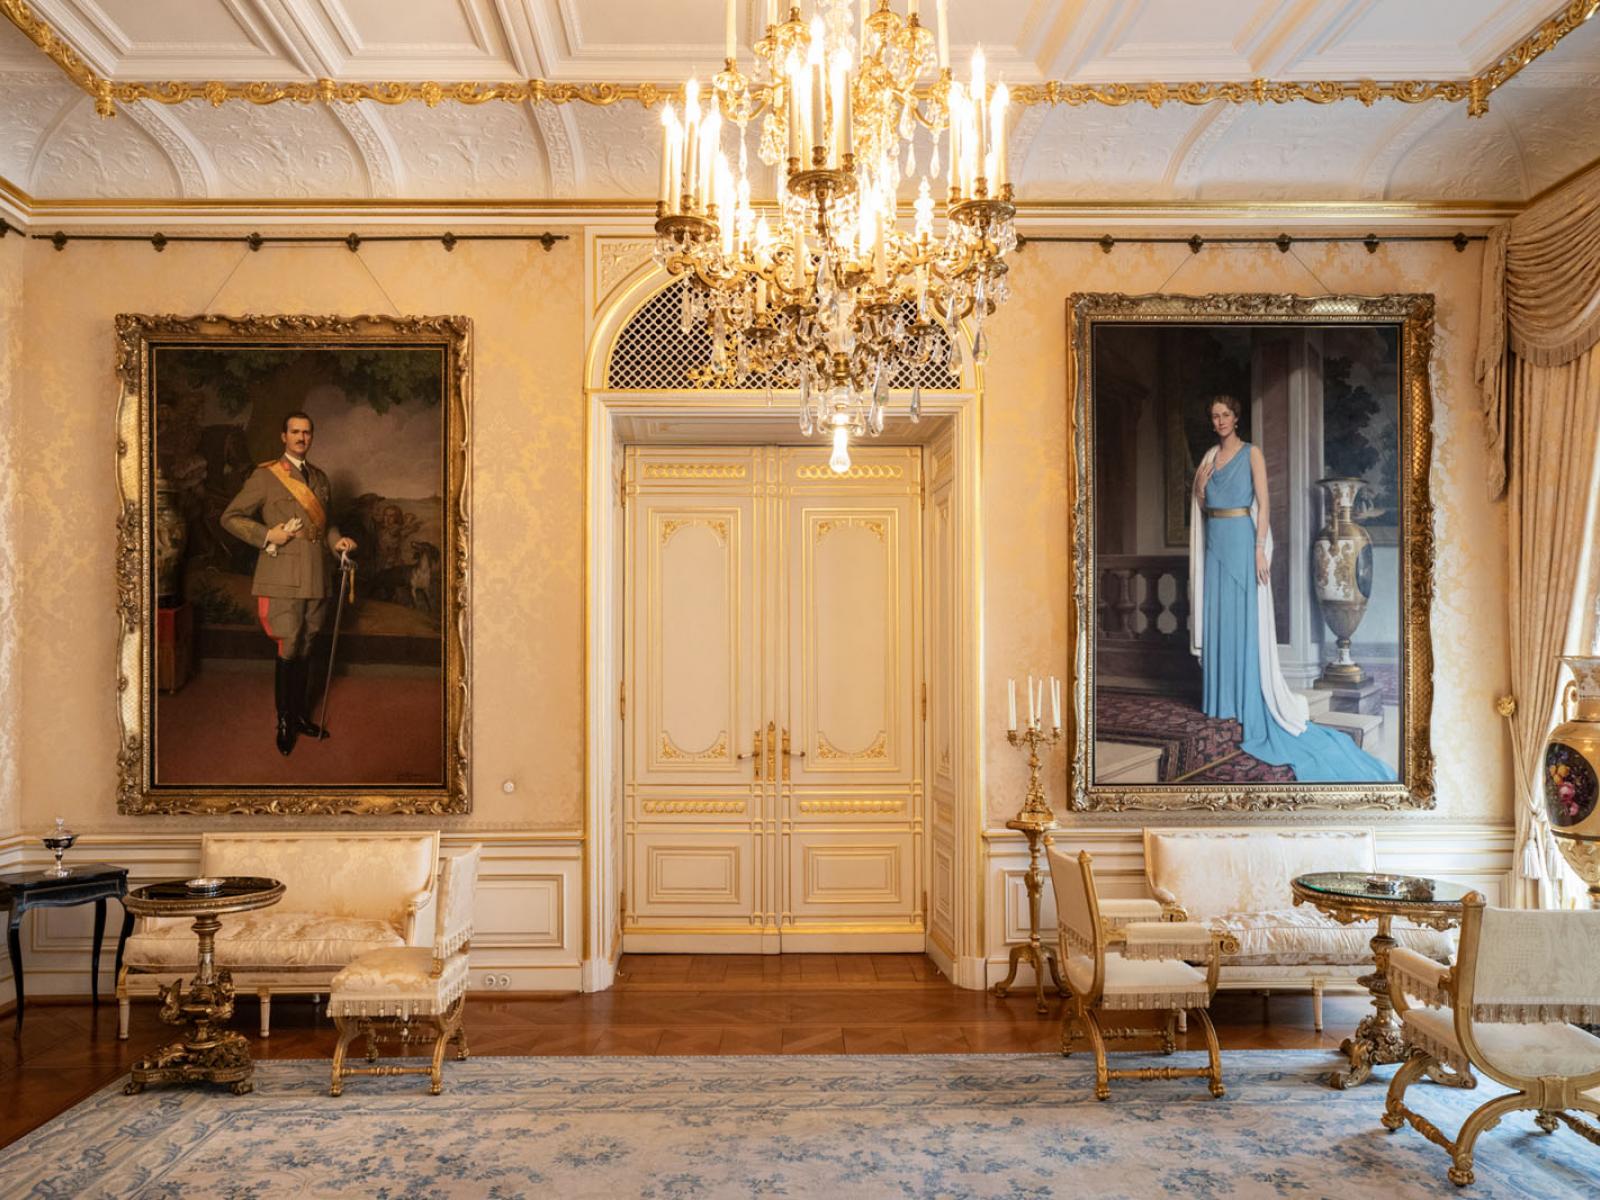 The yellow room of the Palais grand-ducal